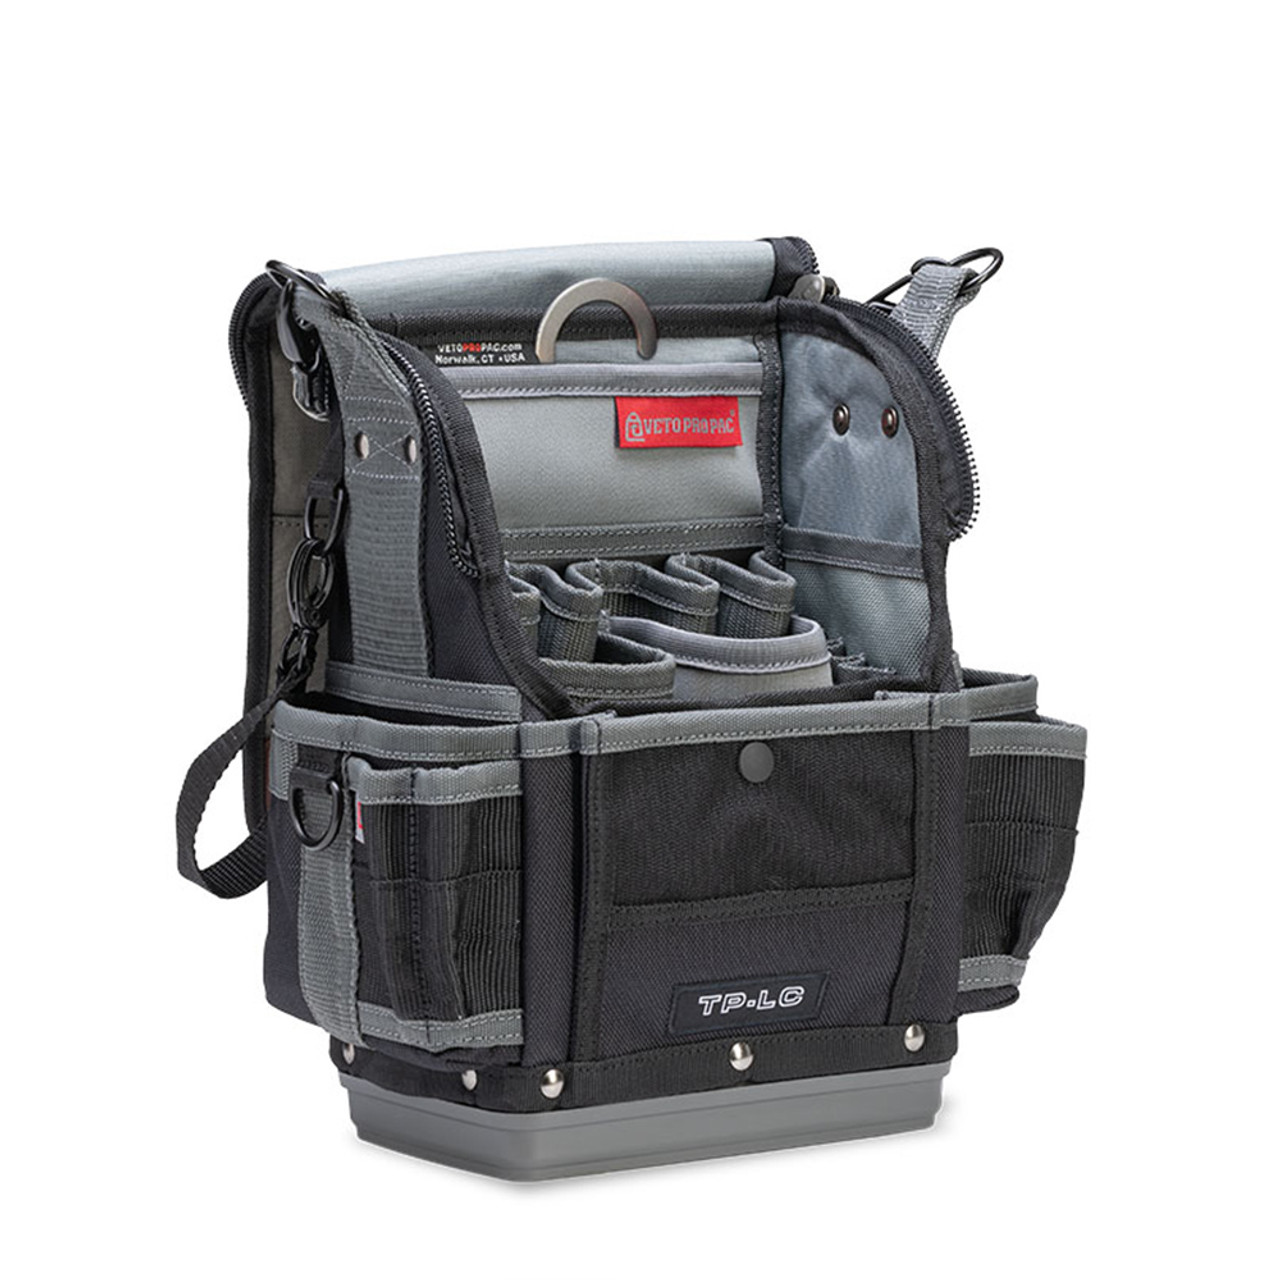 Veto Pro Pac TP-LC Large Service Tool Pouch